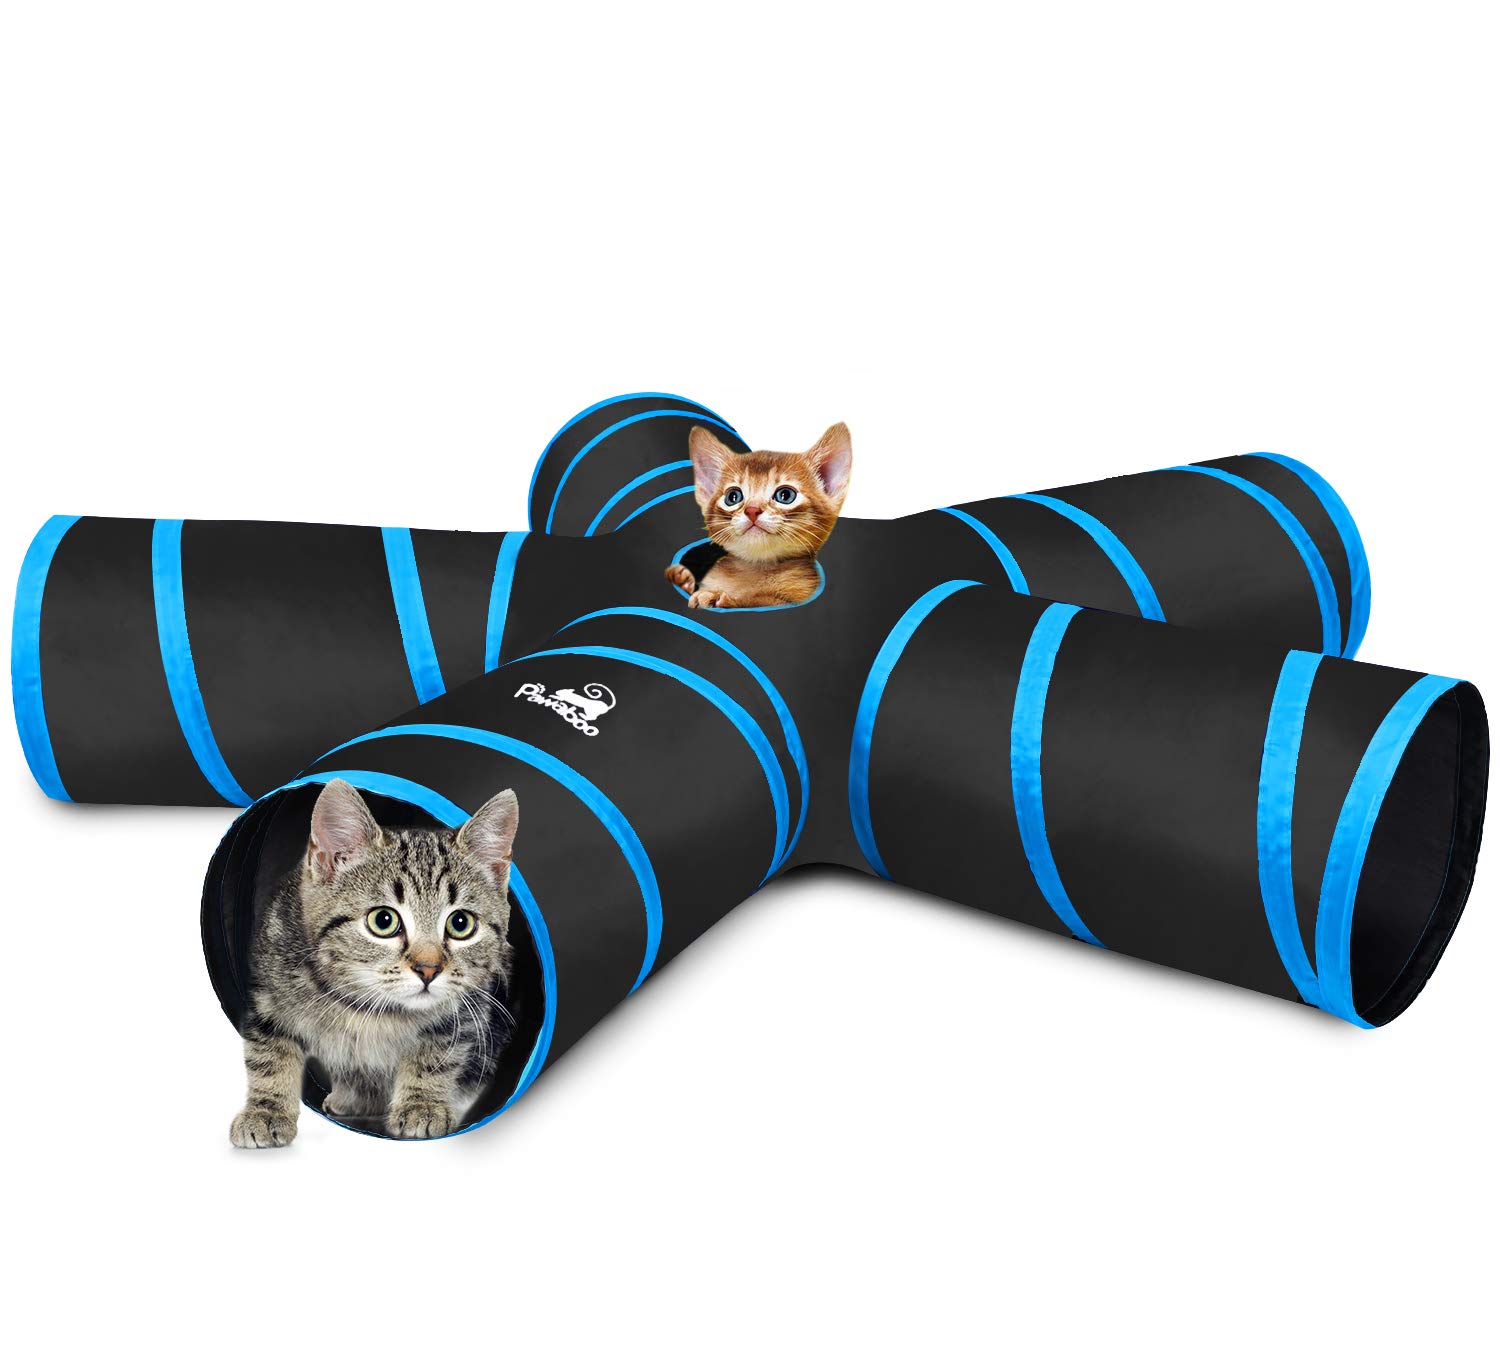 Tunnels Extensible Collapsible Cat Play Tent